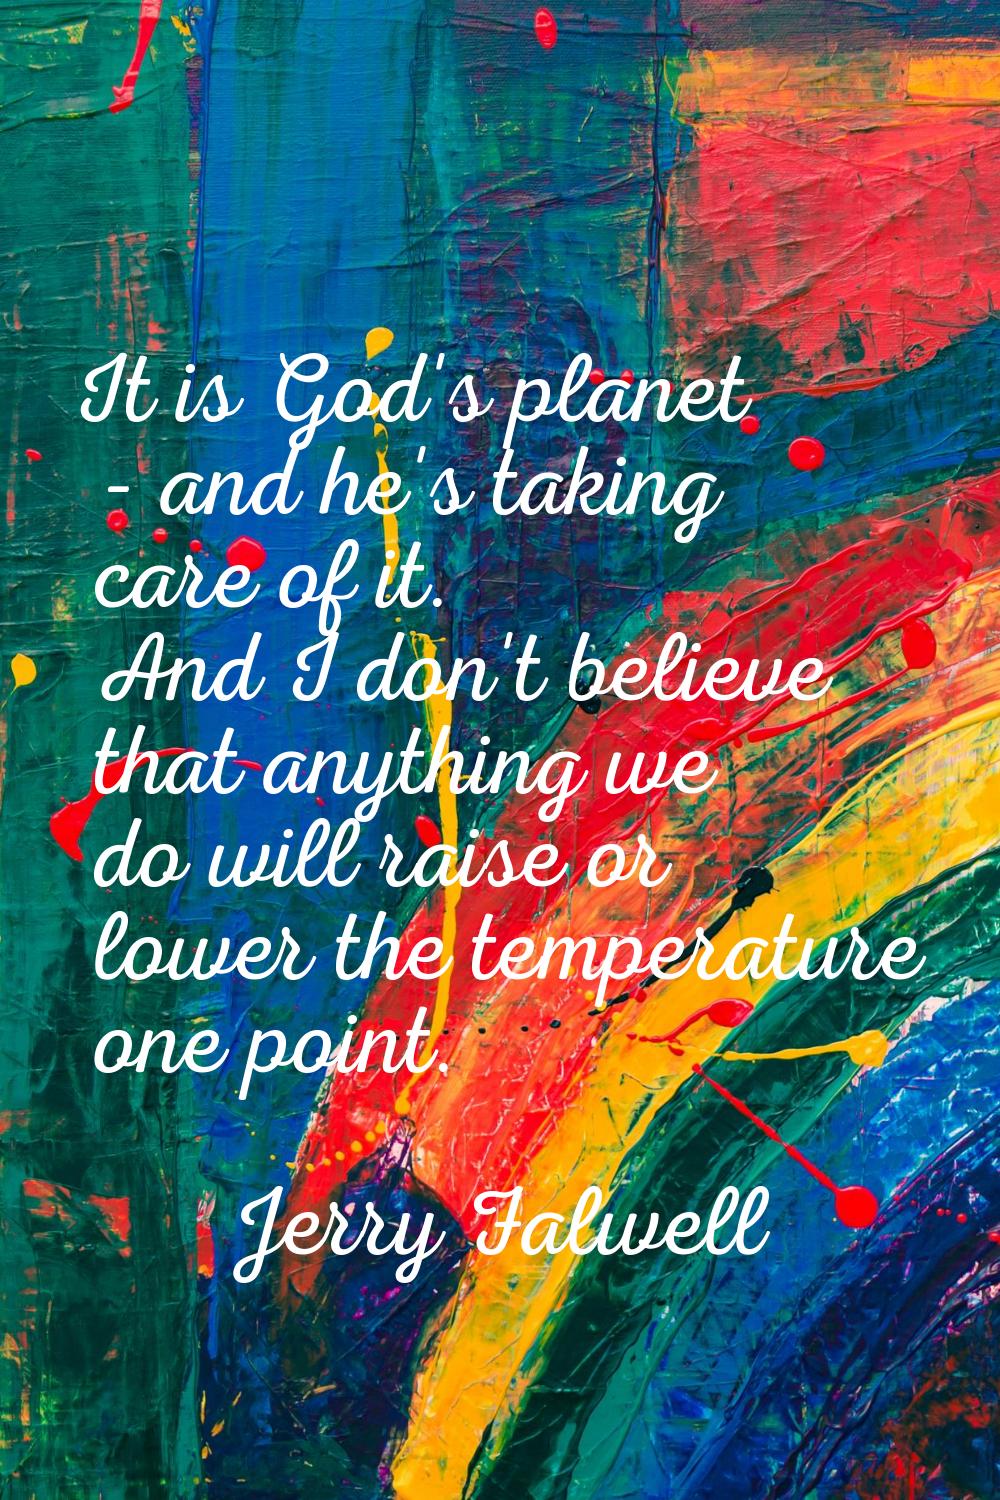 It is God's planet - and he's taking care of it. And I don't believe that anything we do will raise